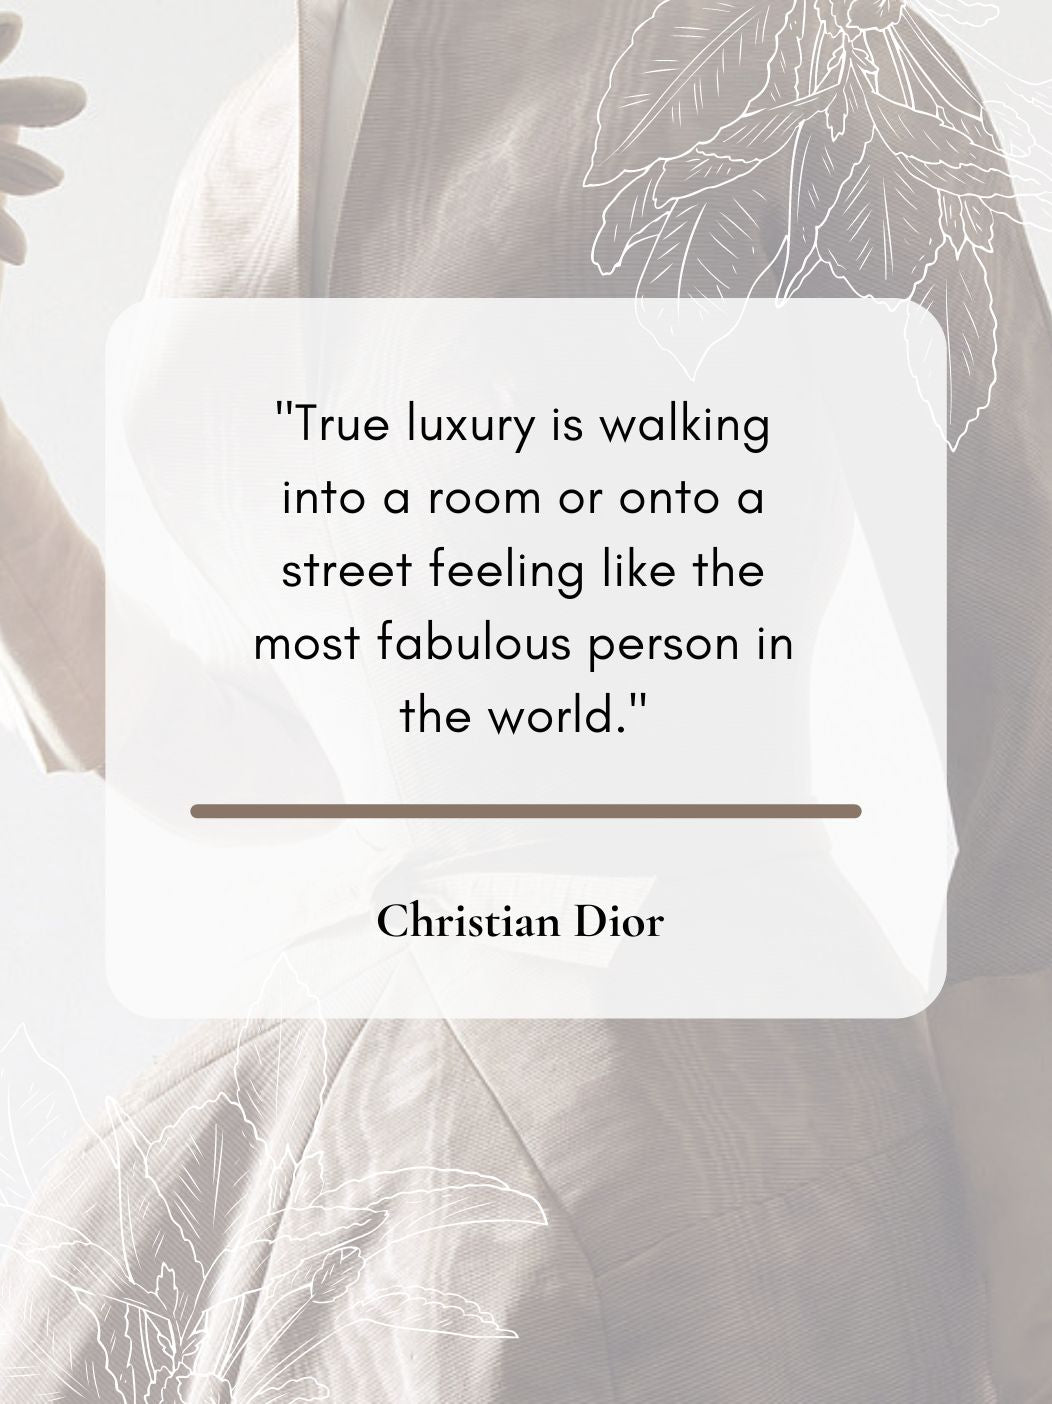 famous quotes by christian dior on fashion